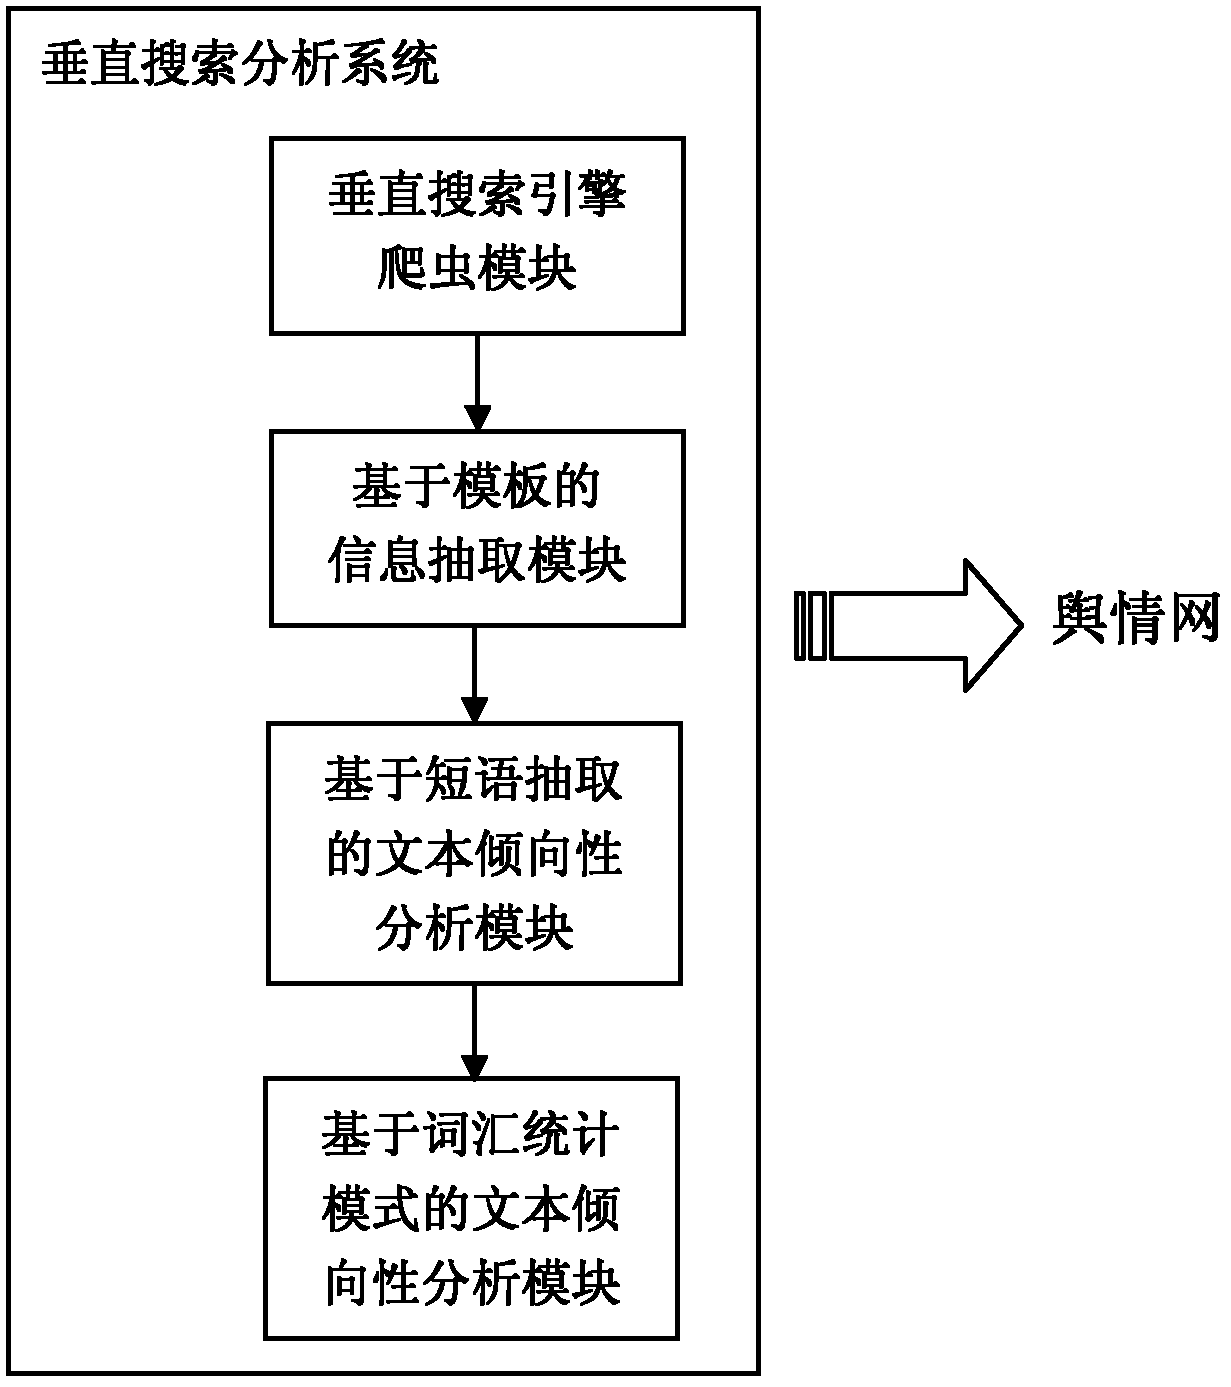 Public opinion vertical search analysis system and method